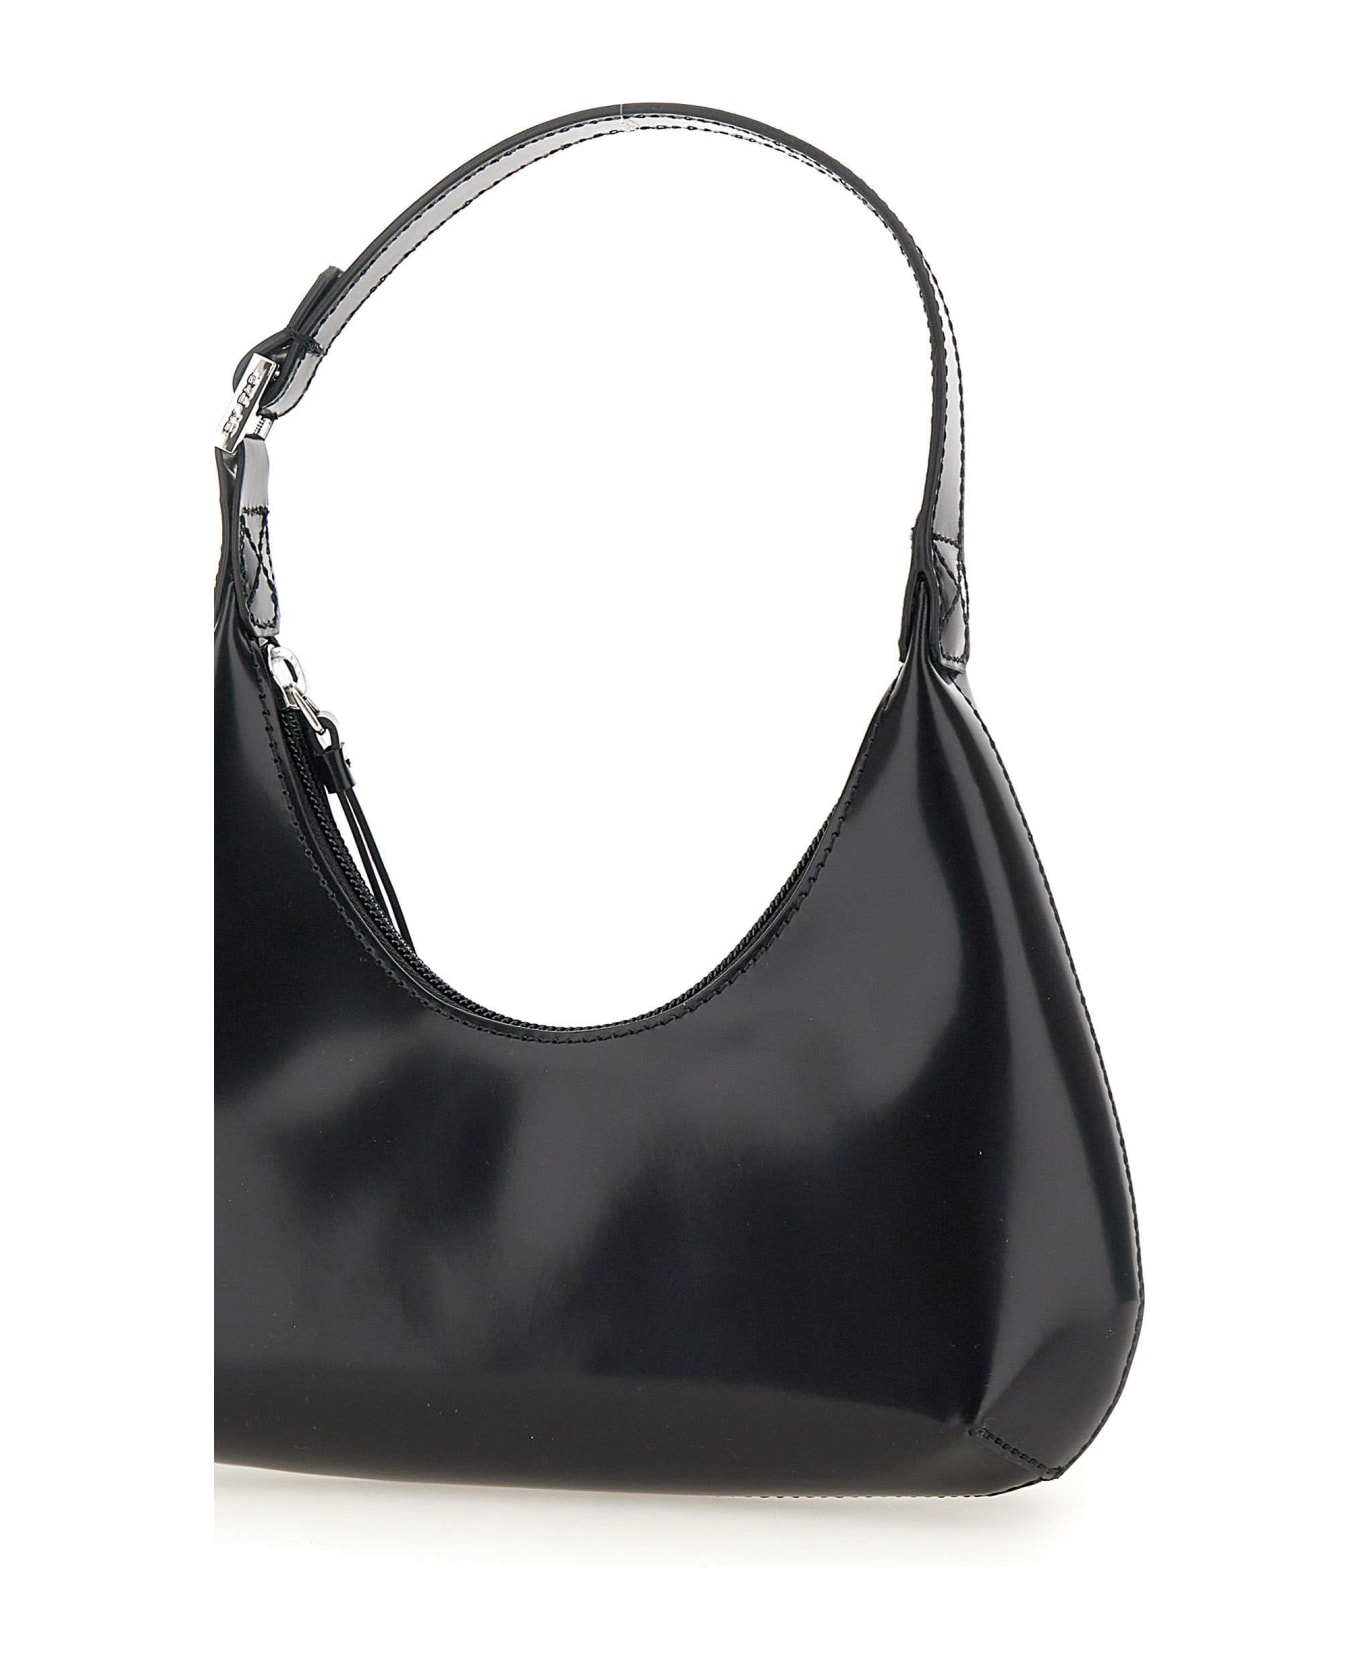 BY FAR "baby Amber" Leather Bag - BLACK トートバッグ